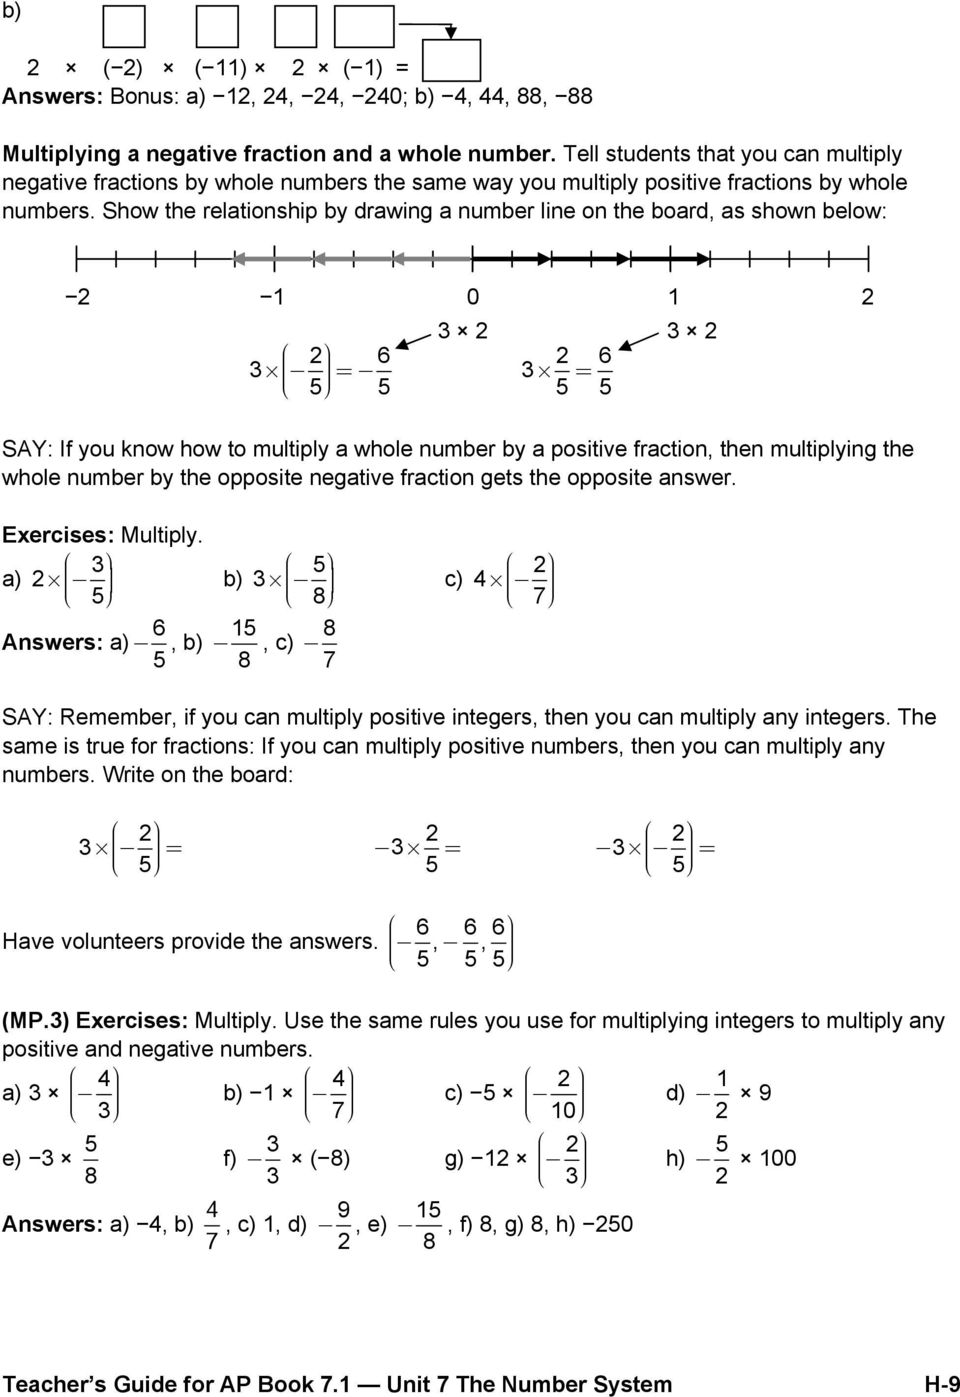 Unit 7 The Number System Multiplying And Dividing Integers Pdf Free Download